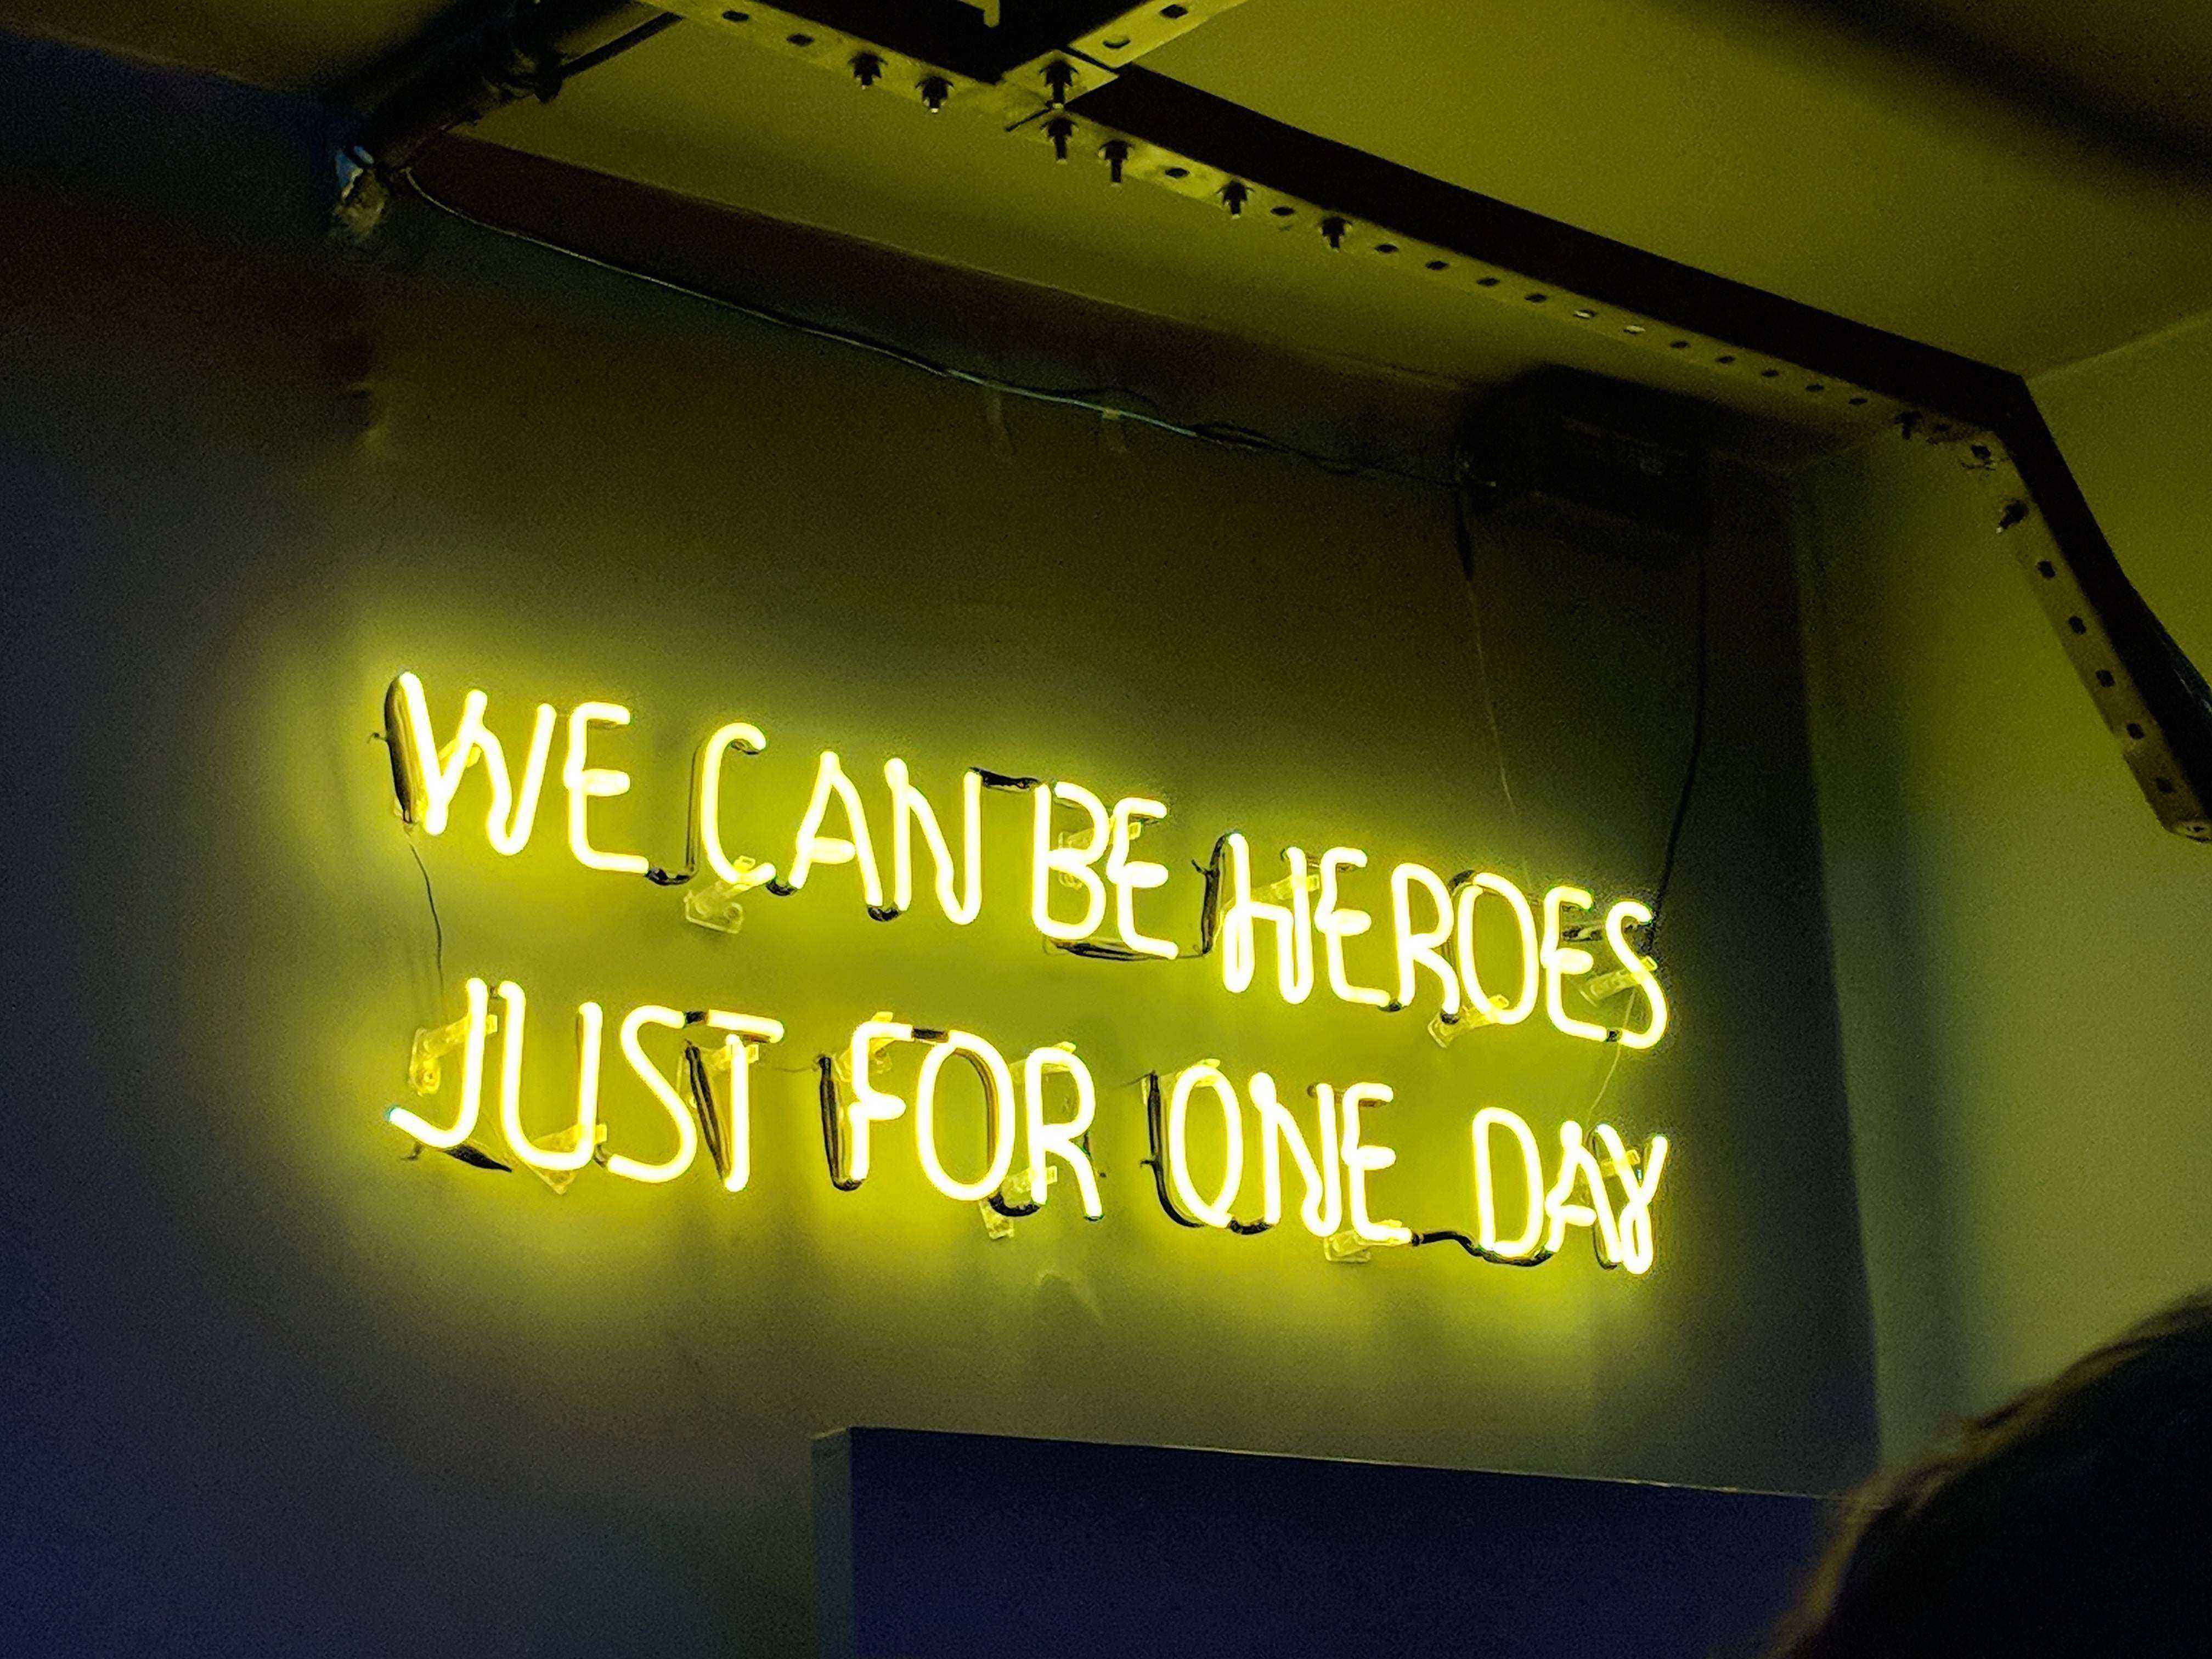 A neon sign saying "We can be heroes just for one day"